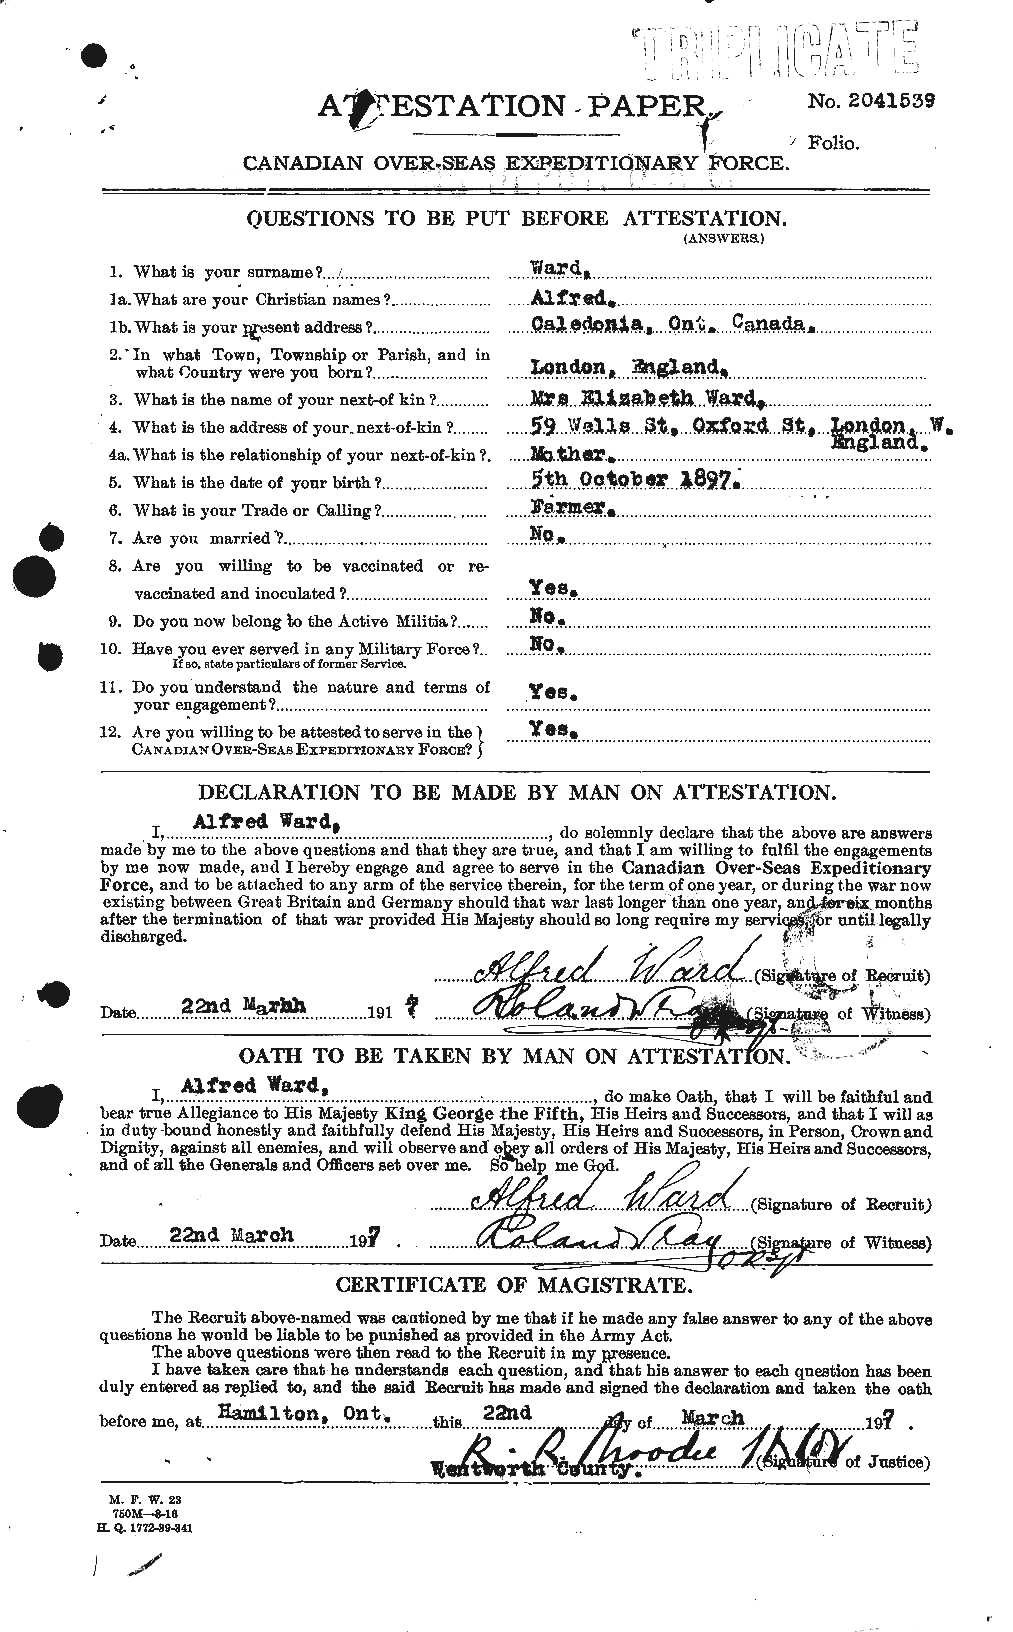 Personnel Records of the First World War - CEF 655114a